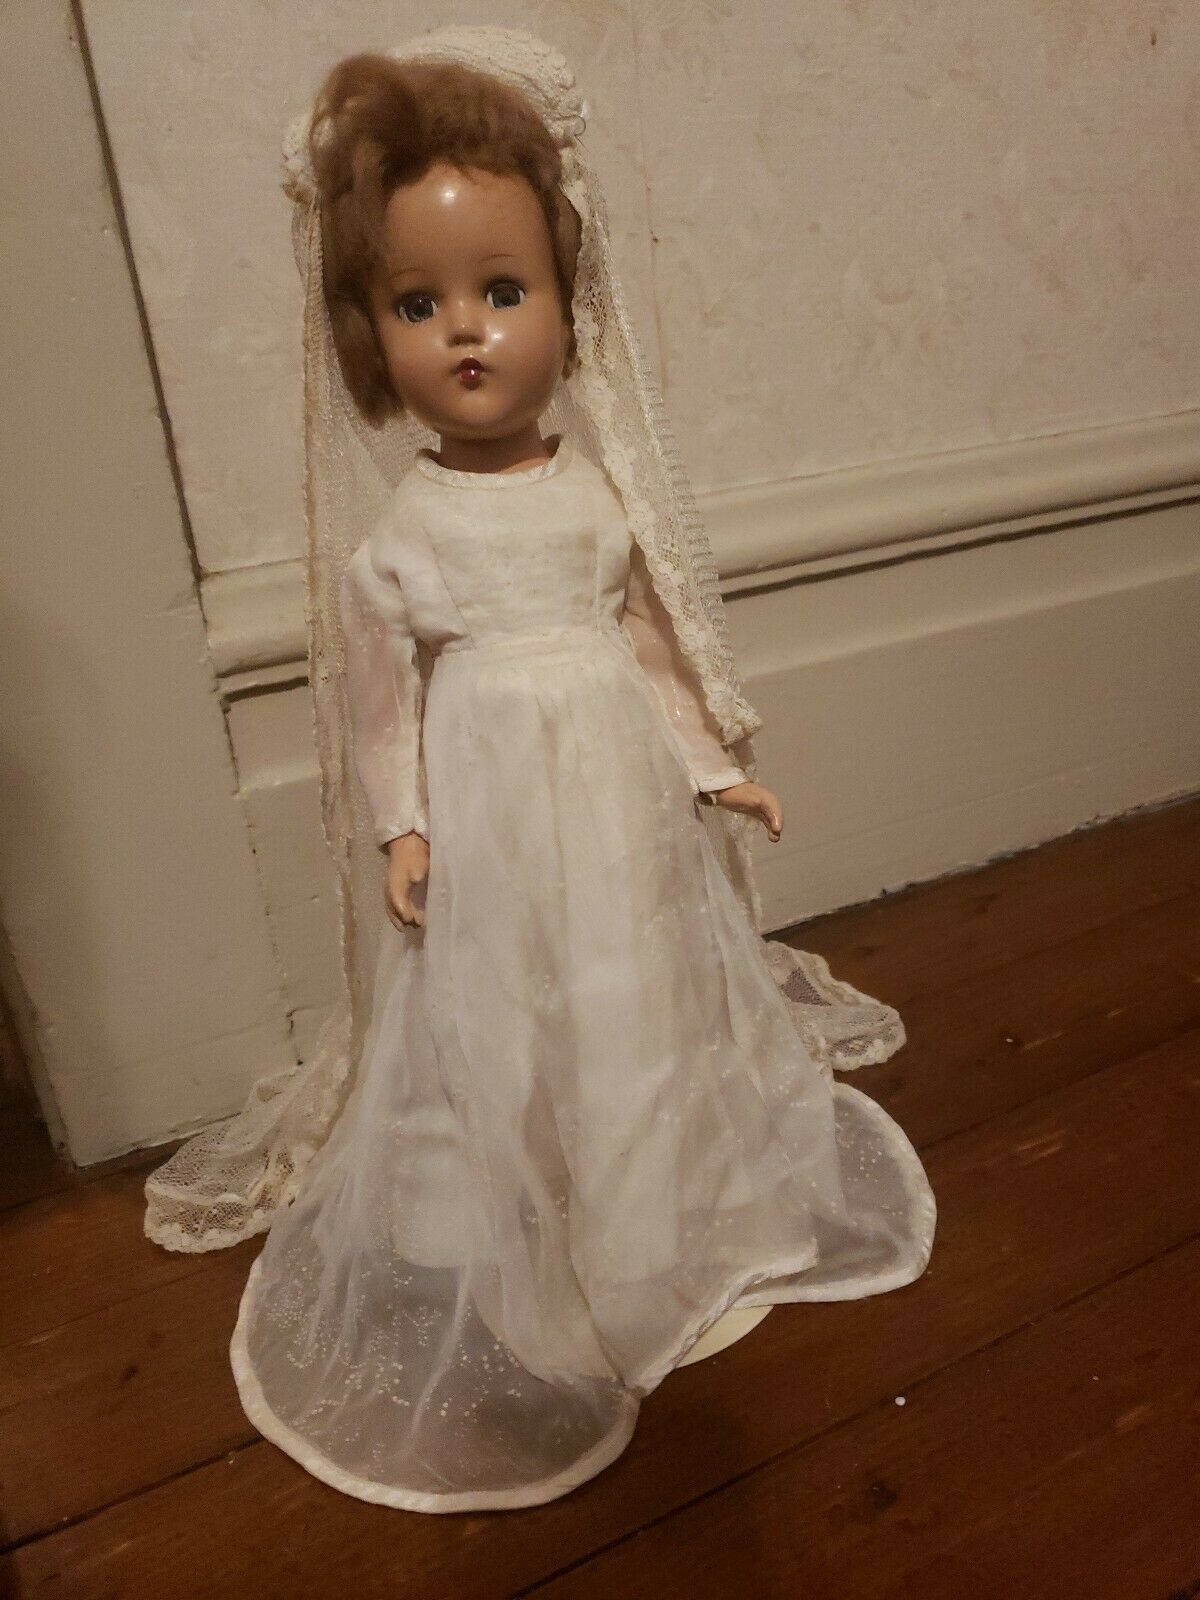 Vintage 1930s Composition Bride Character Girl Doll 14" Tall